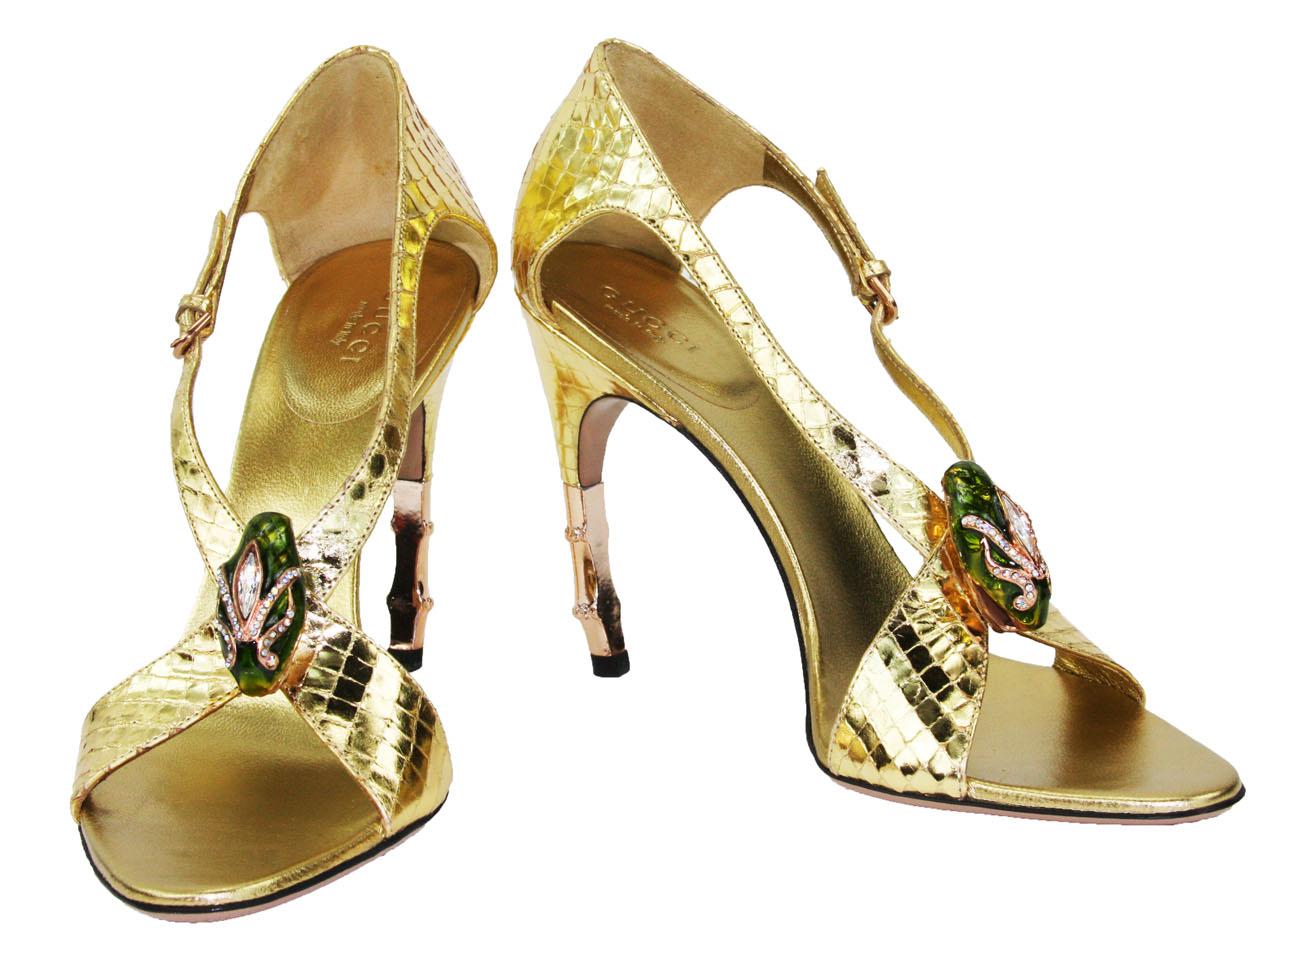 New Tom Ford for Gucci S/S 2004 Gold Python Jeweled Bamboo Heel Shoes 9.5 - 39.5 In New Condition For Sale In Montgomery, TX